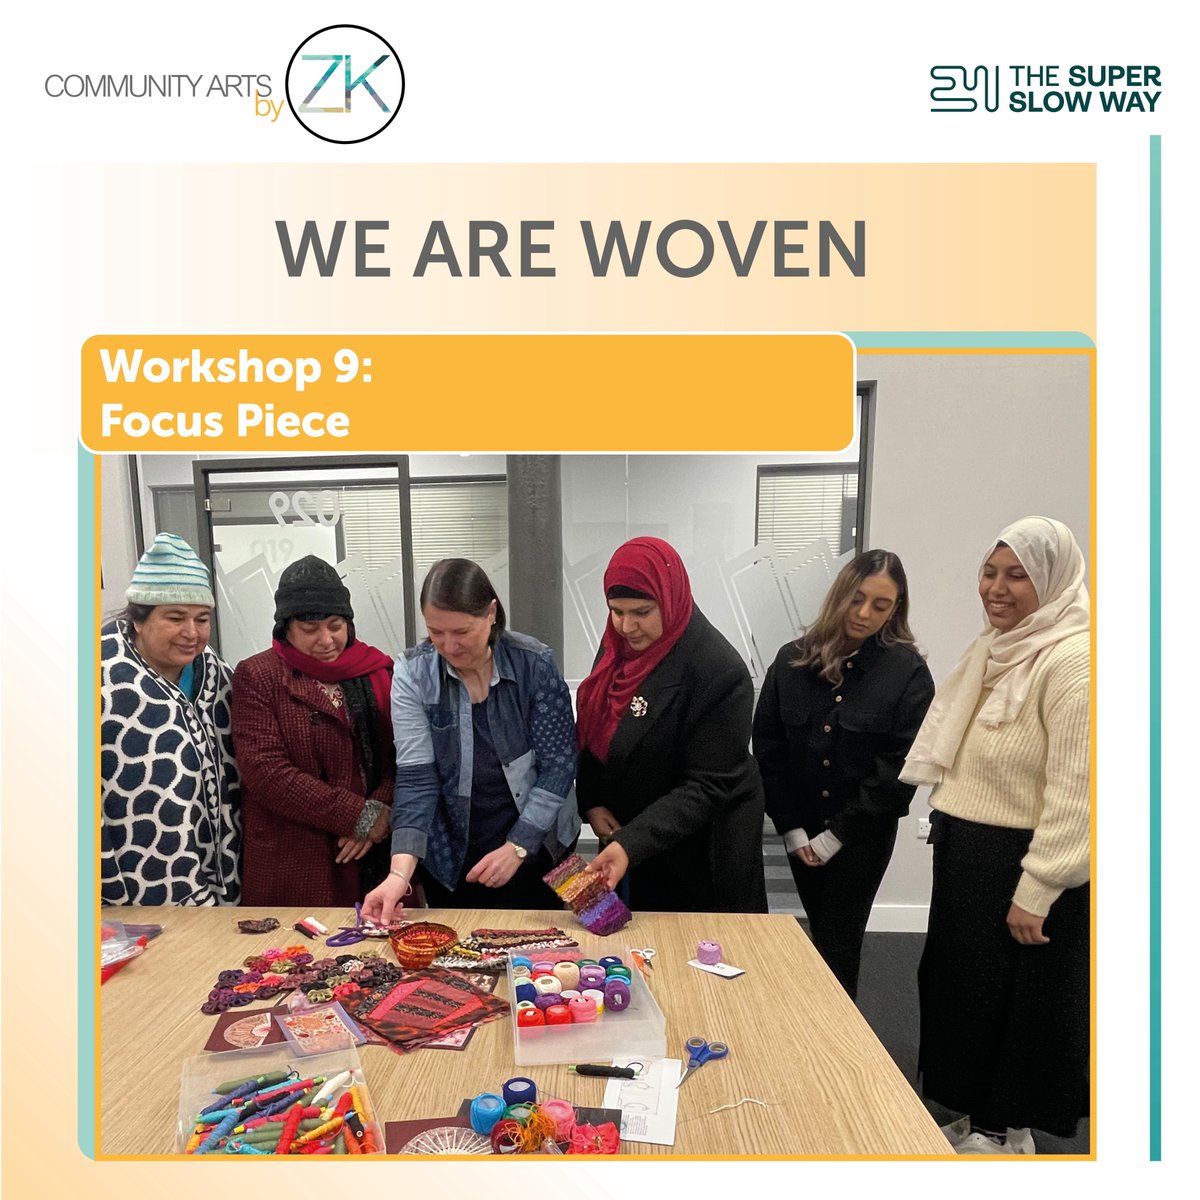 This week, Jenny Waterson had discussions with the group and helped everyone to combine a variety of techniques learnt throughout the workshops. We are looking forward to next week when we all come together, share and celebrate our work.
@Superslowway @jw4art #art #textiles https://t.co/8qGBMKVUa6